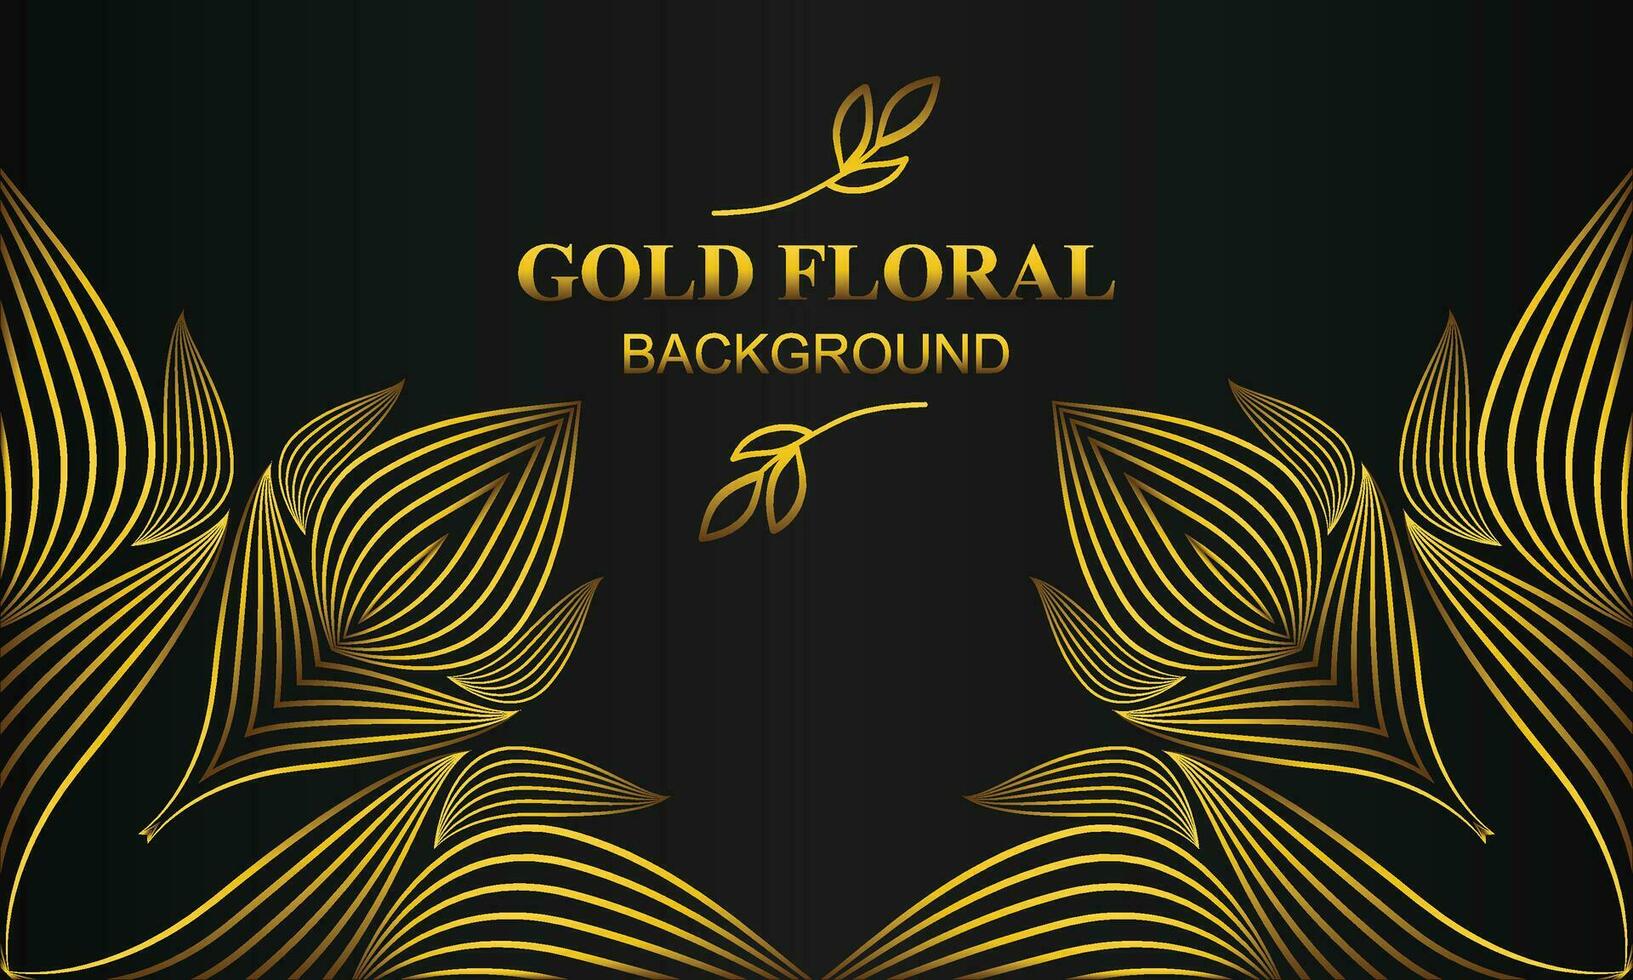 beautiful elegant gold floral background with floral and leaf ornament vector